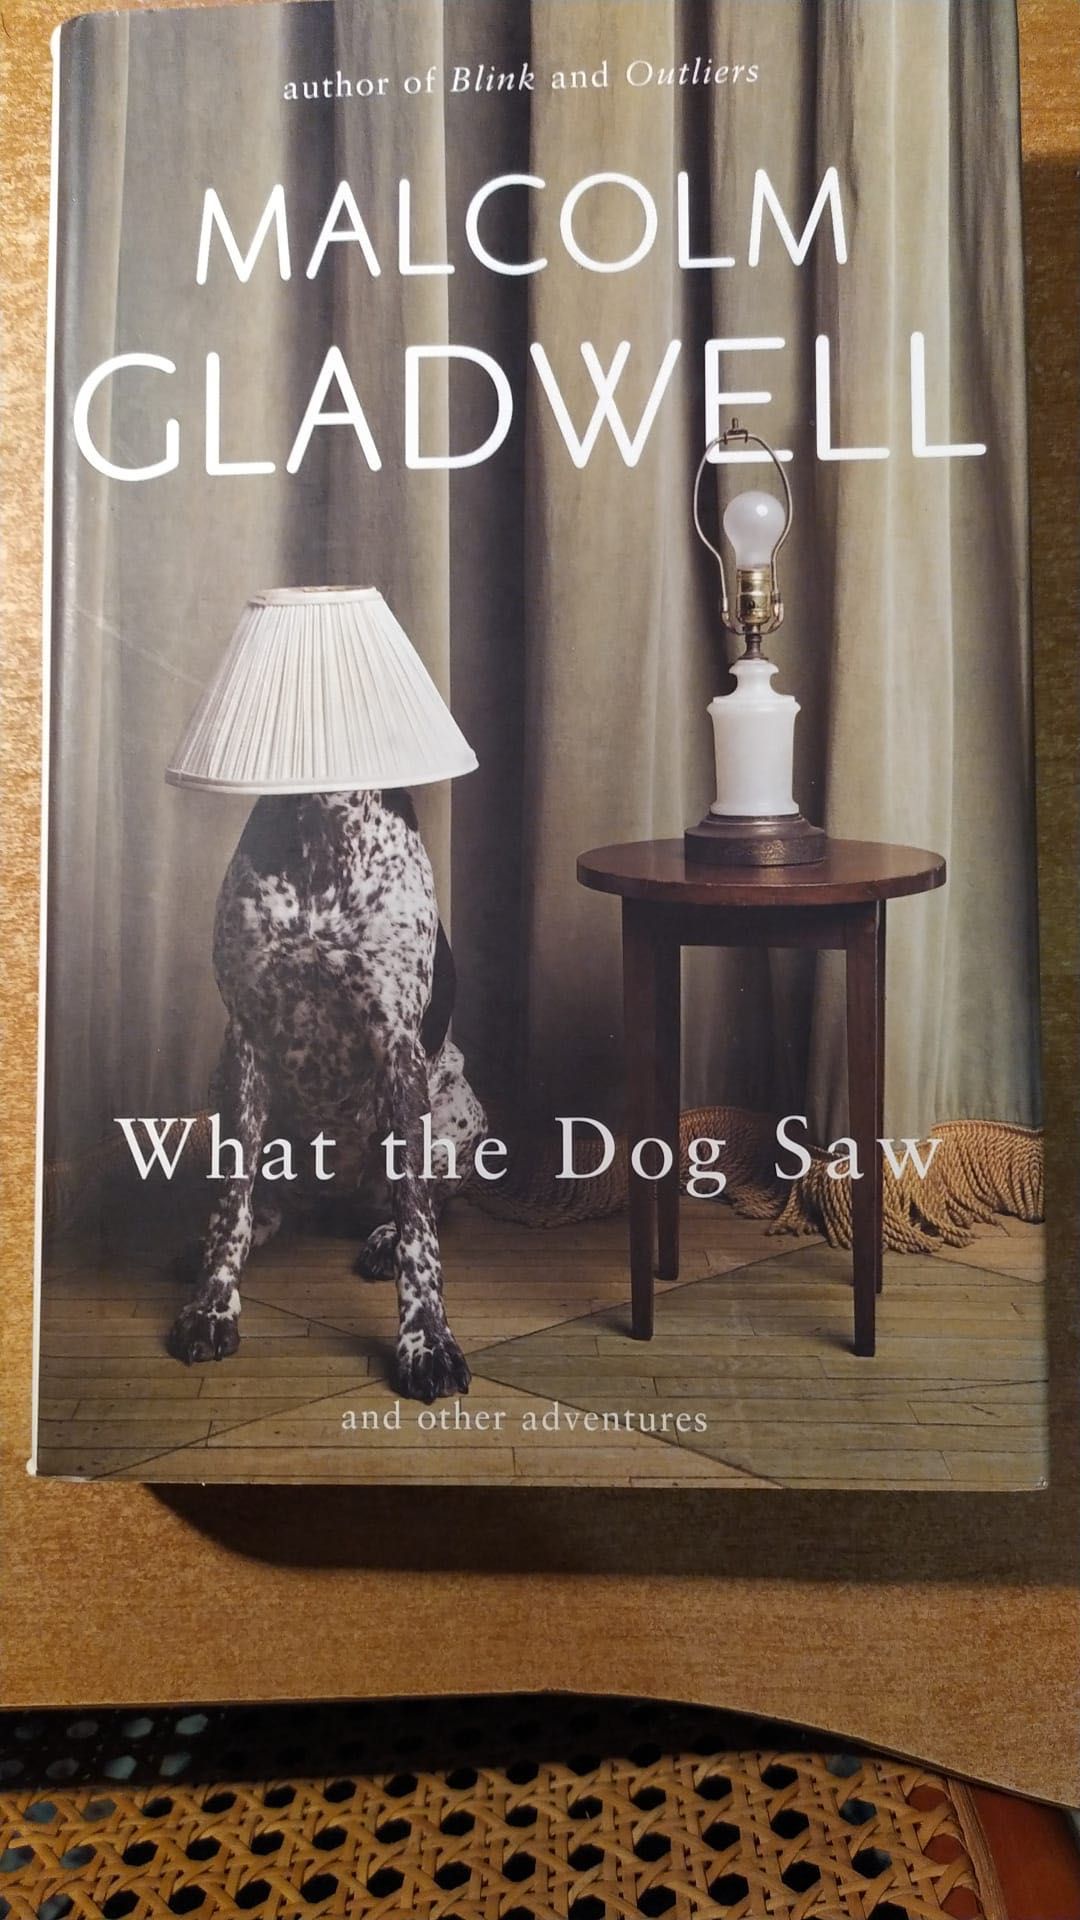 What the dog saw - Malcolm Gladwell